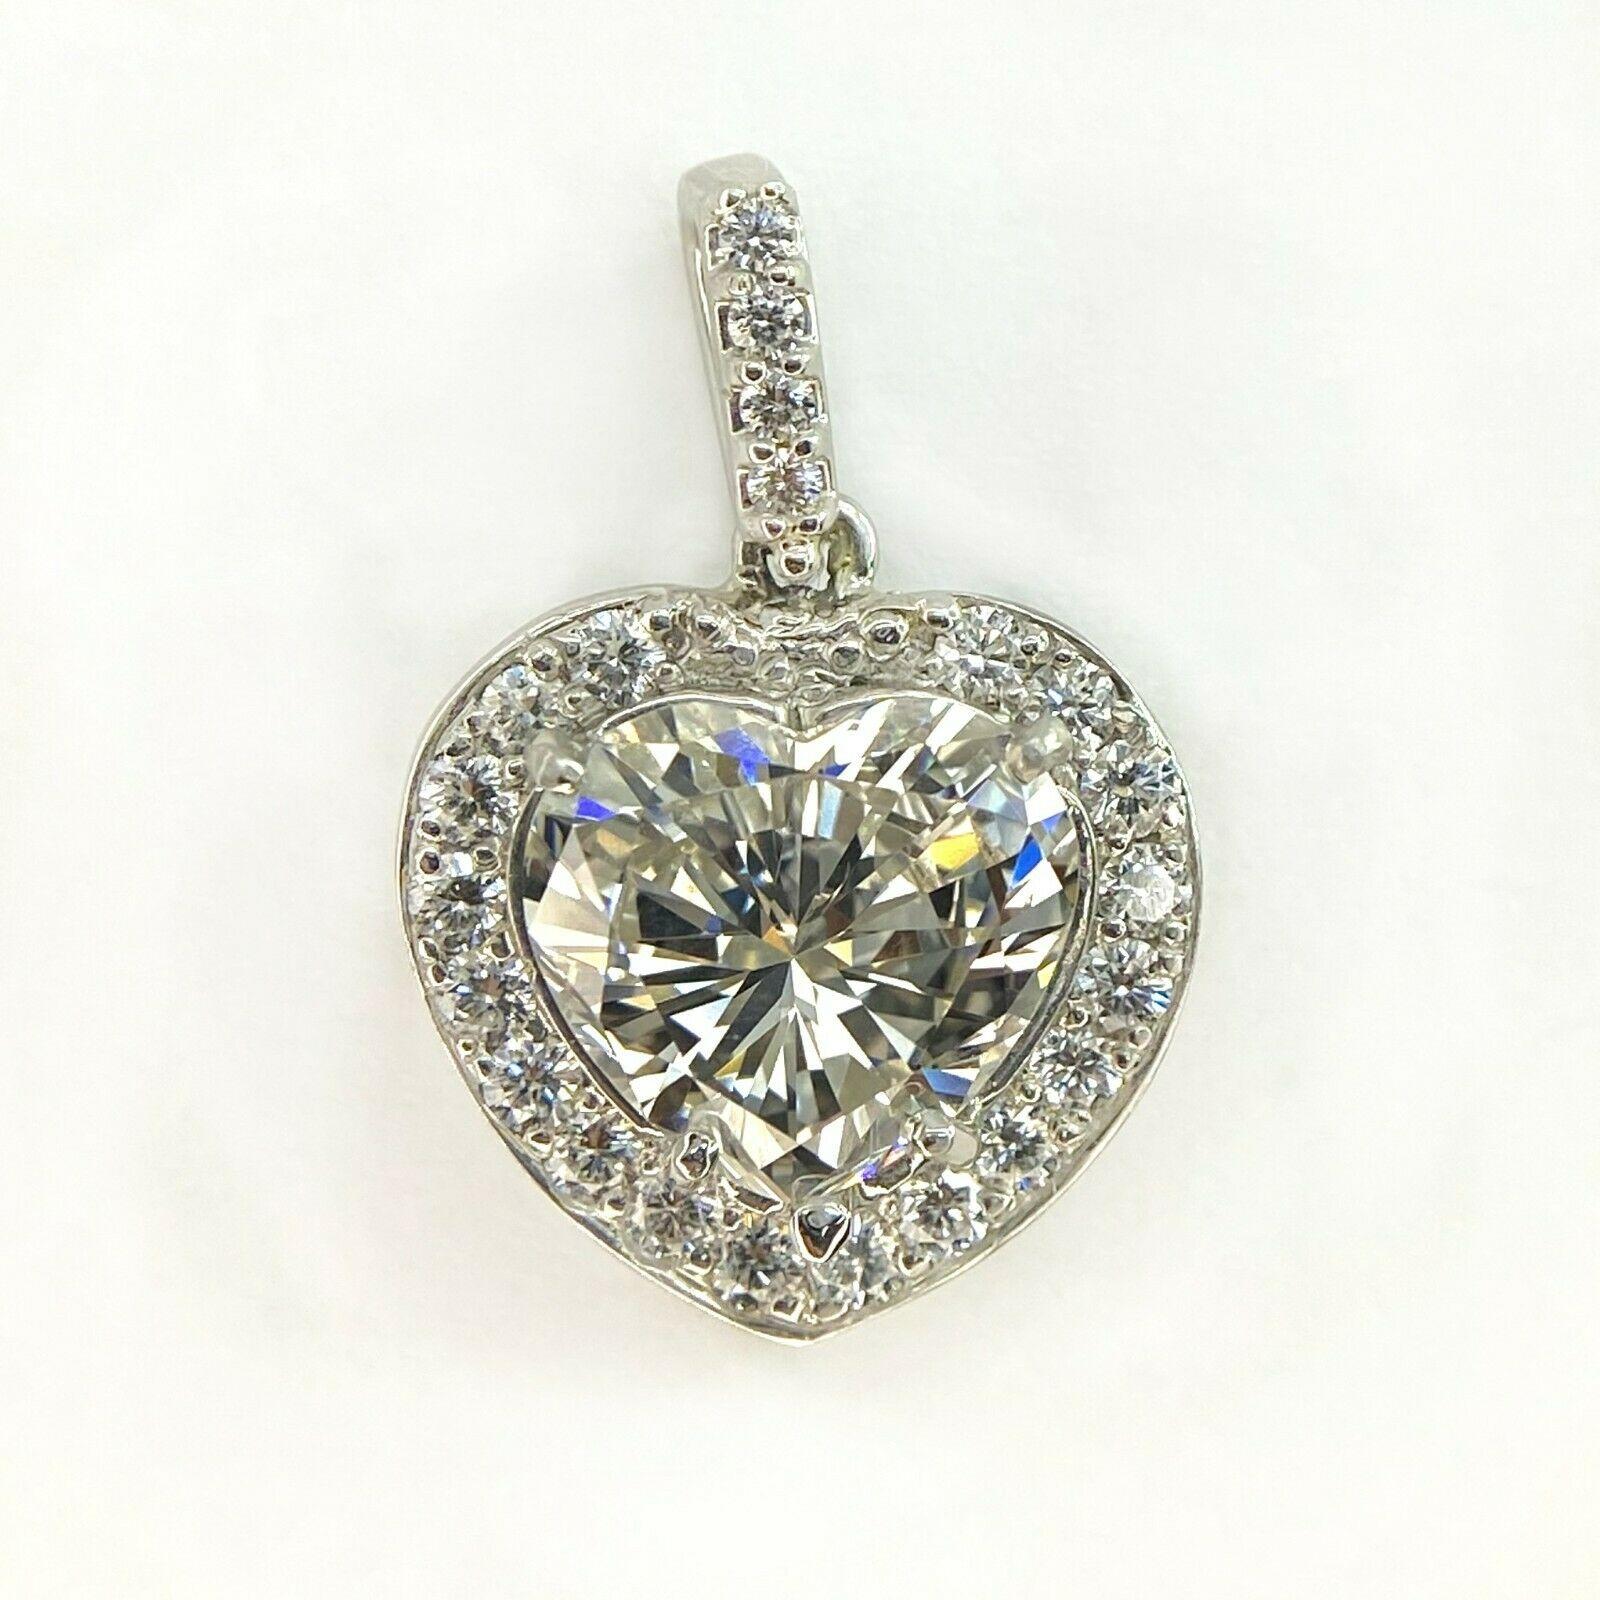 This beautiful pendant has heart cut diamond surrounded by a row of sparkling micropavé diamonds(approximately 0.30ctw, 22ps). Center stone is GIA 2.60ct J SI1 diamond heart cut. It is 22mm long, 14mm wide, 6mm thick.
Specifications:
    PENDANT